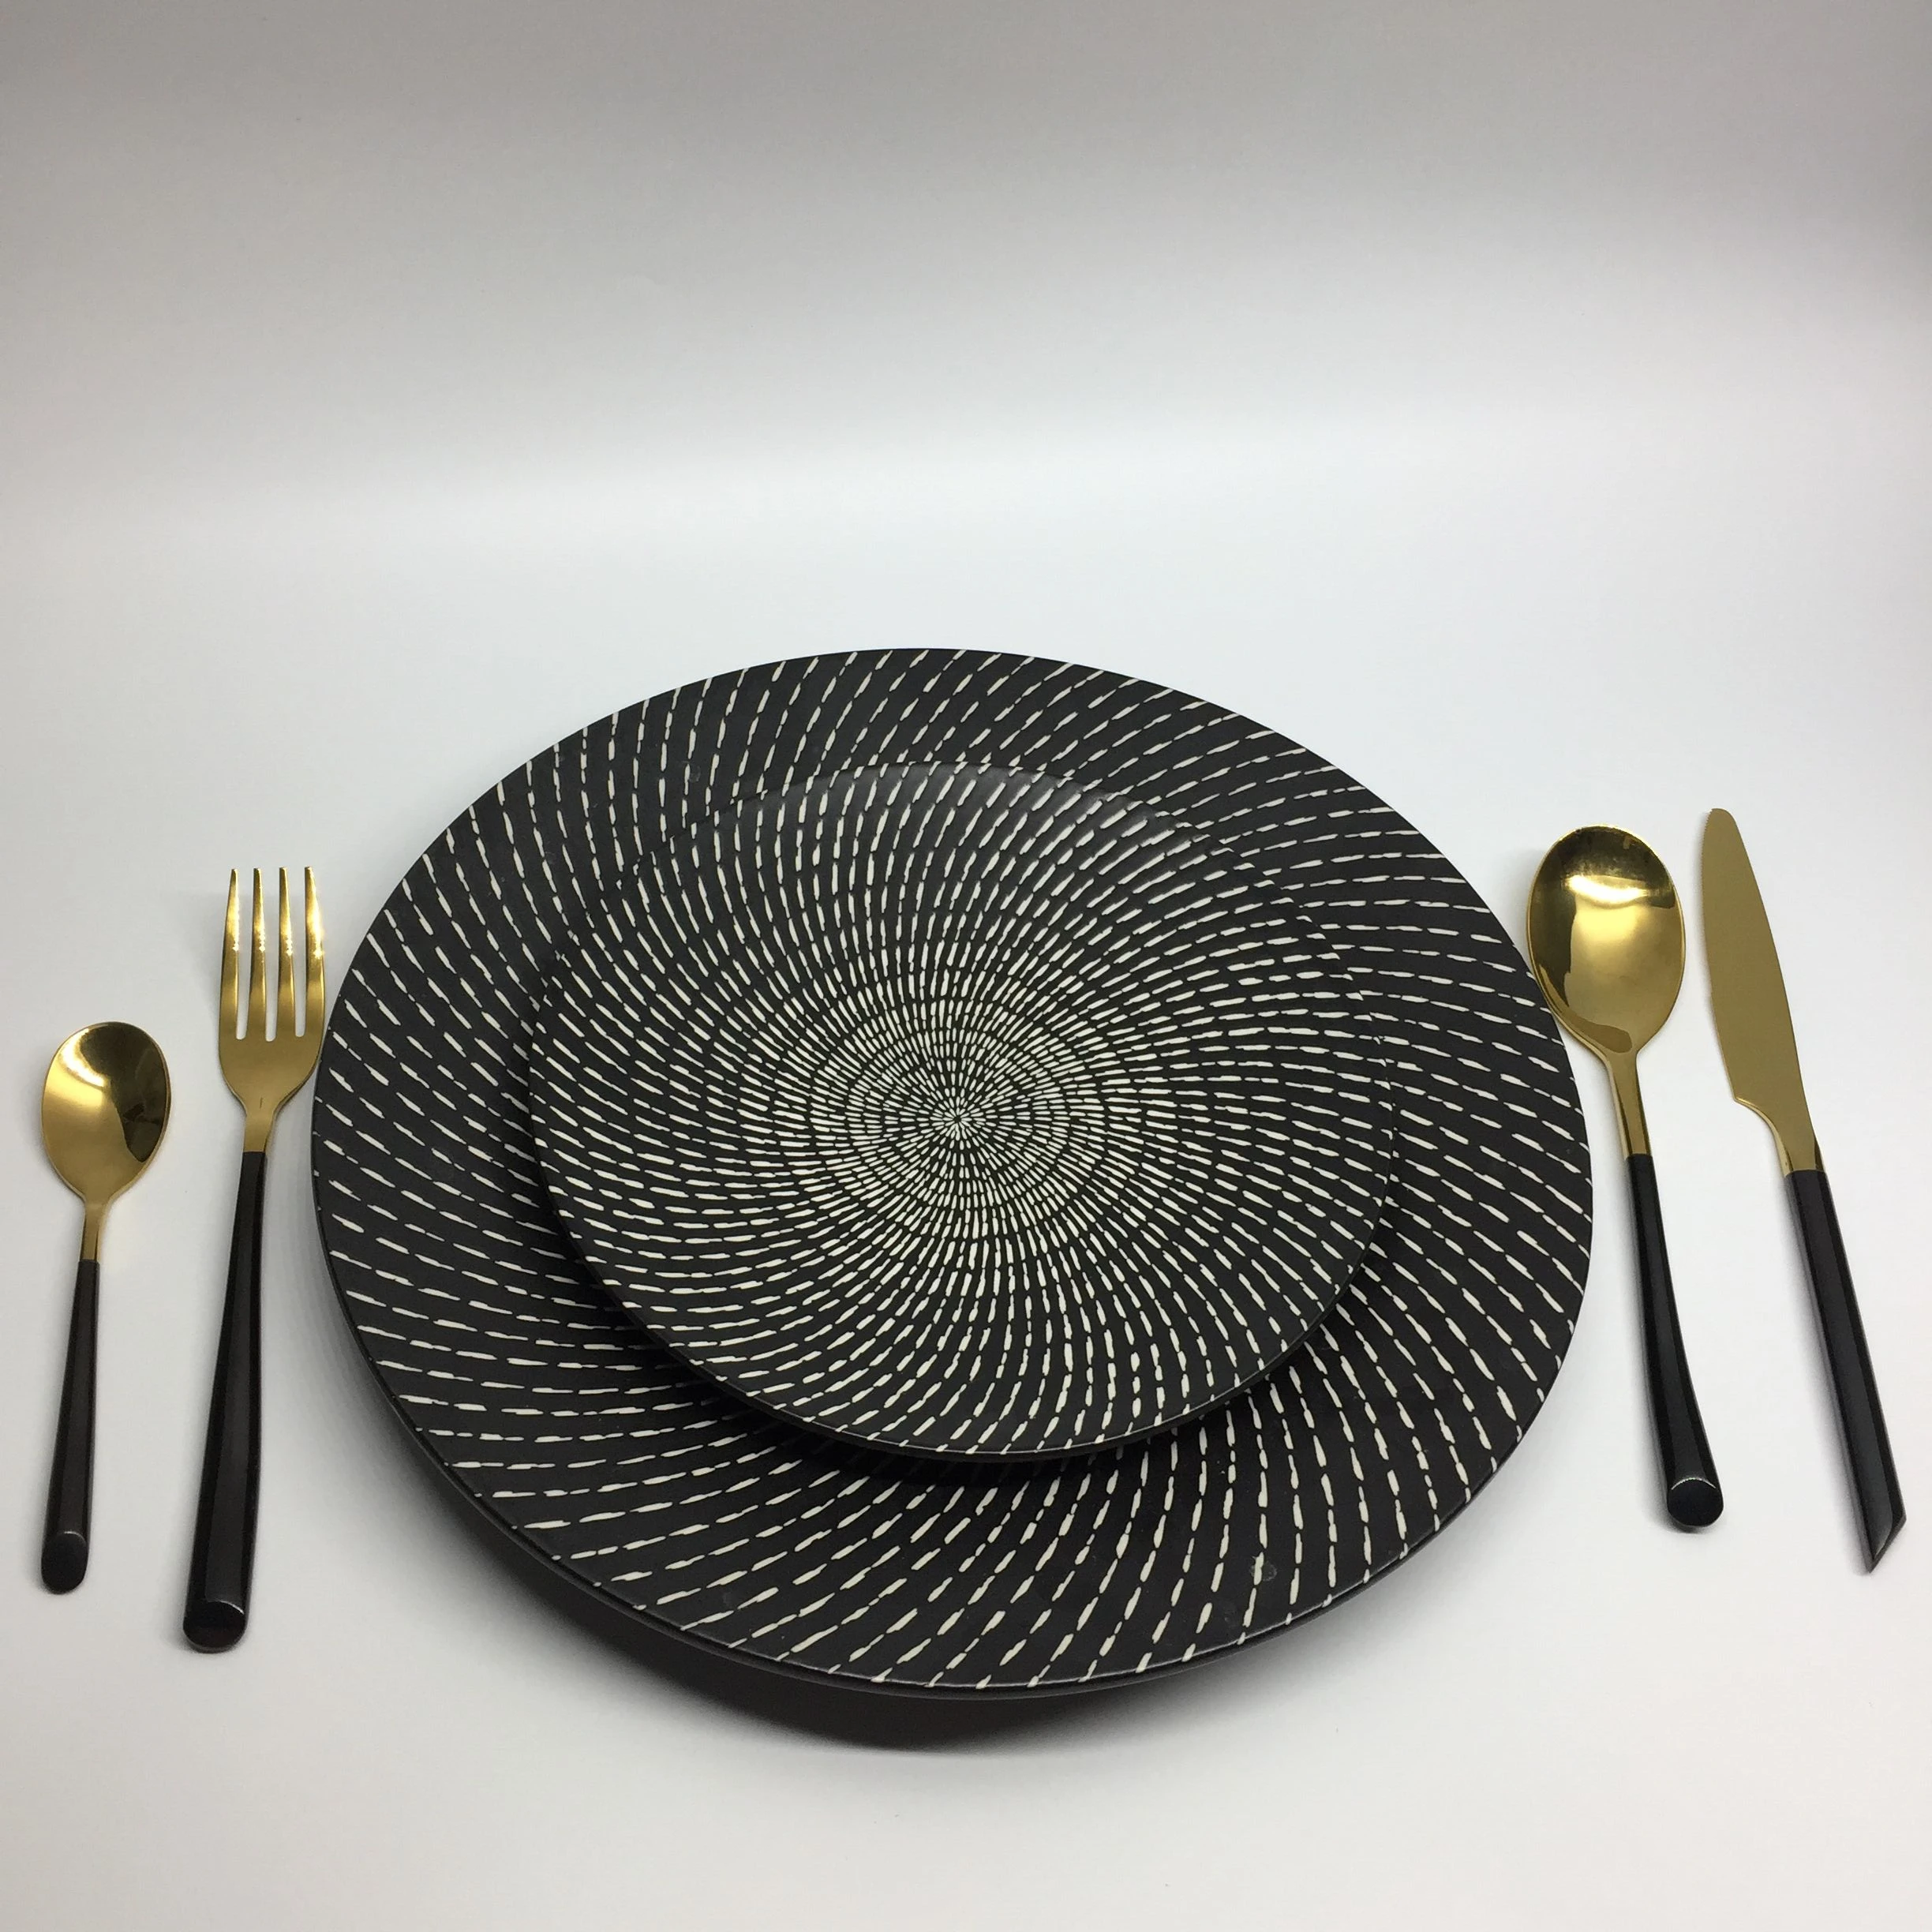 2019 New Arrival Black and White Ceramic Dinnerware Set With Gold Cutlery Set Pizza Knife Restaurant Steak Plate